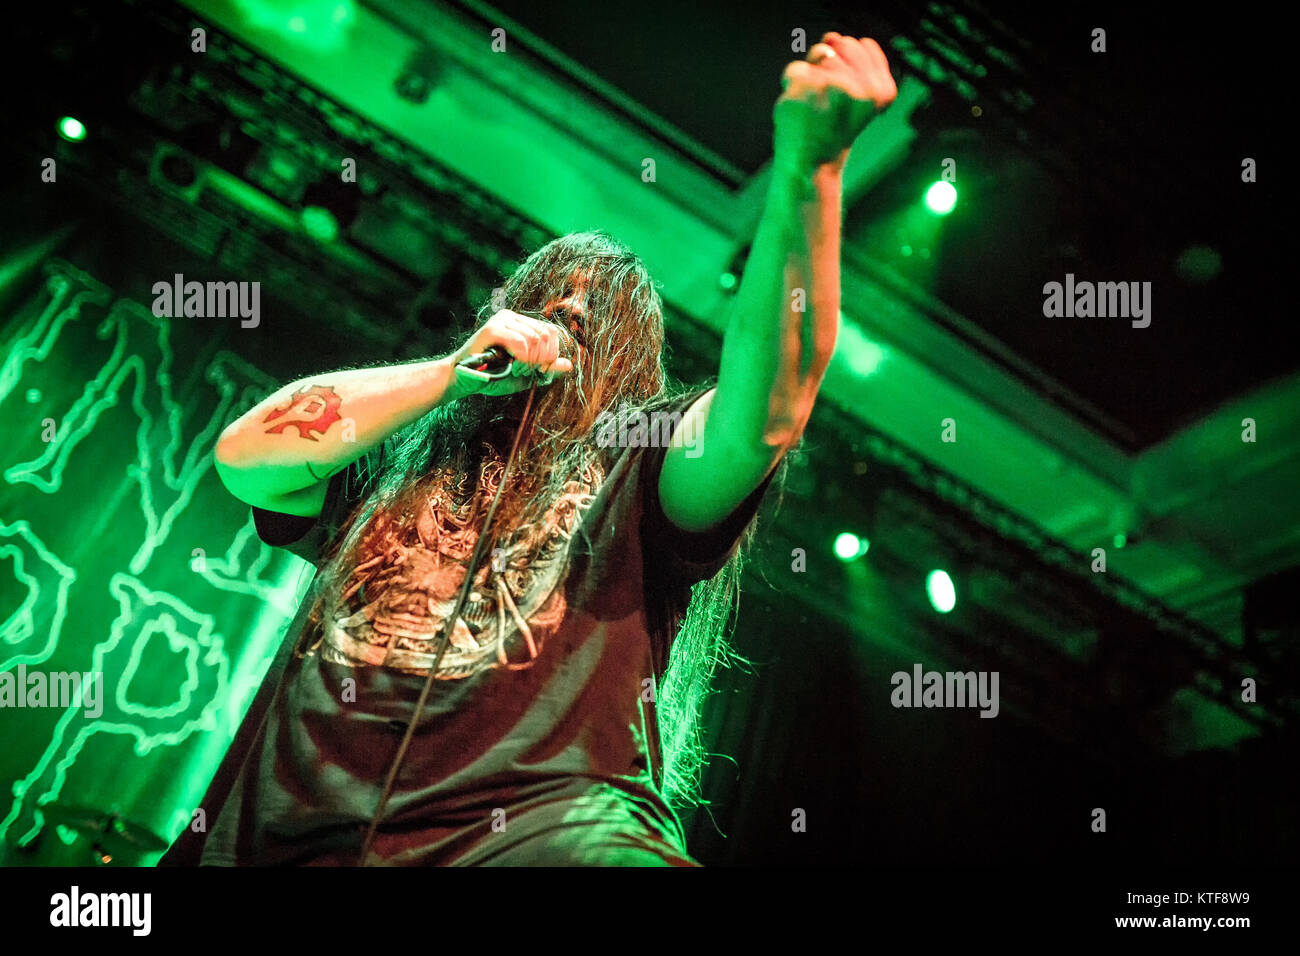 The American death metal band Cannibal Corpse performs a live concert at Sentralen in Oslo. Here vocalist George “Corpsgrinder” Fisher is seen live on stage. Norway, 17/04 2016. Stock Photo